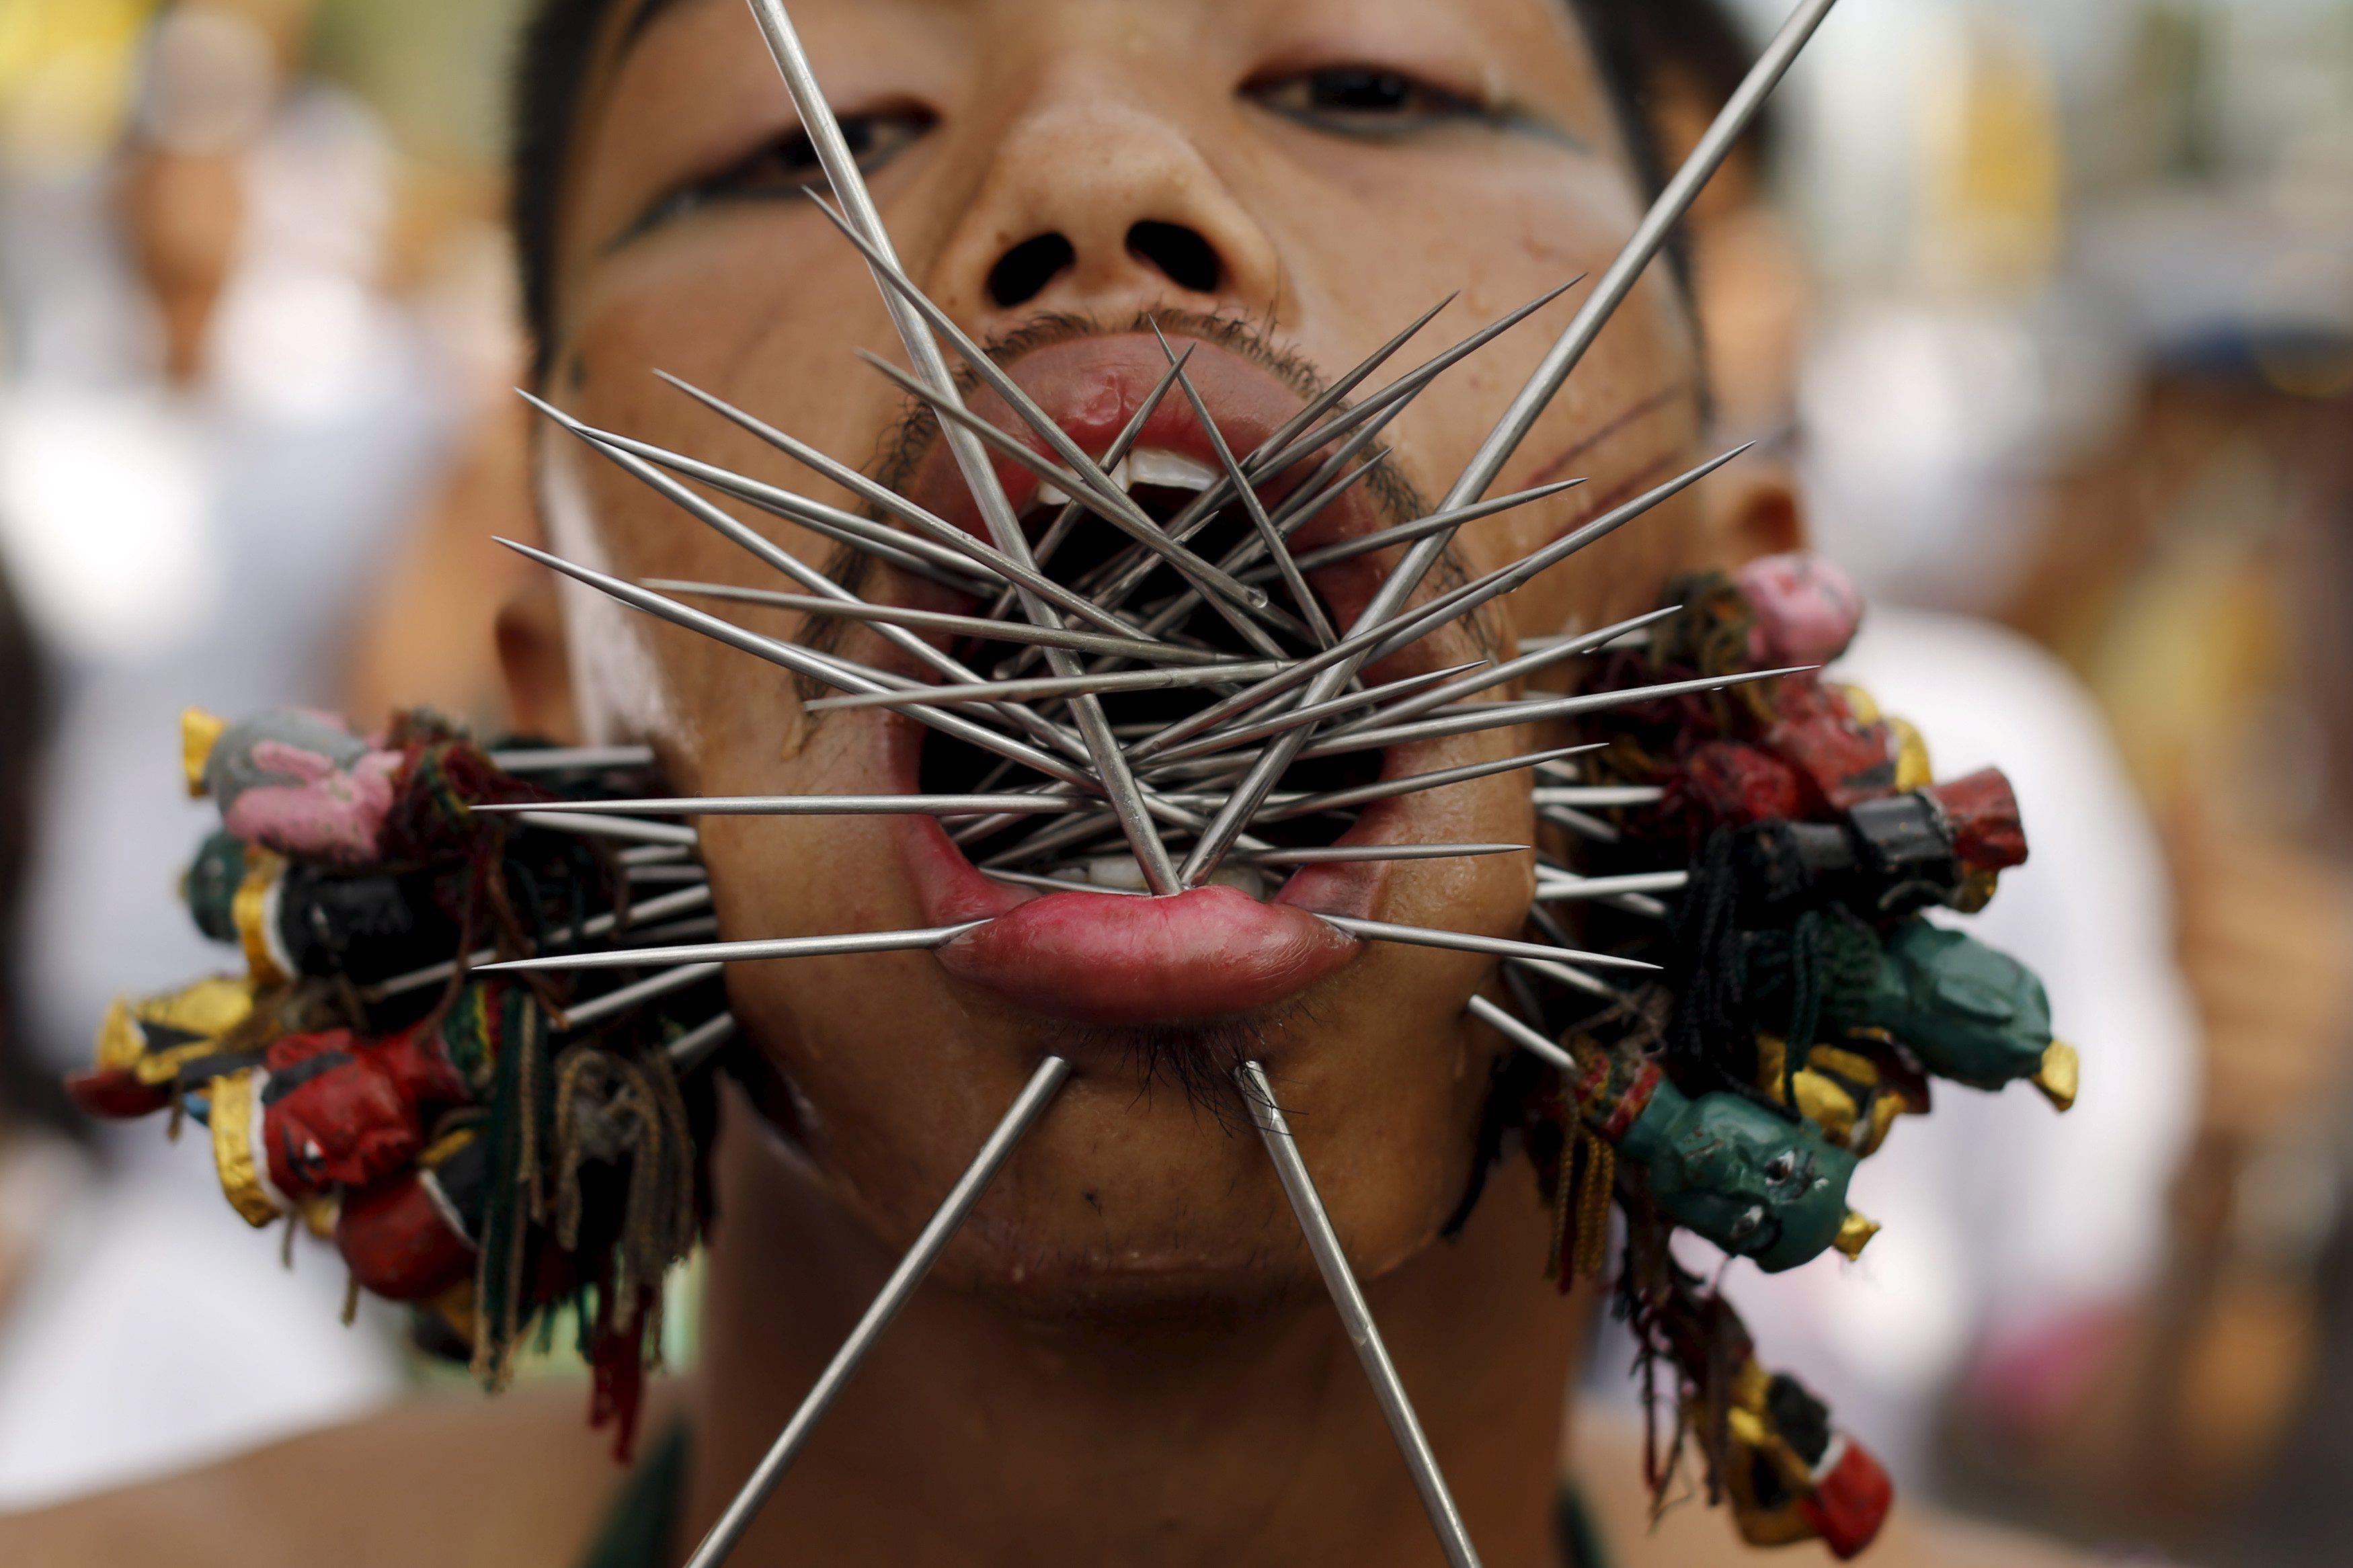 A devotee of the Chinese Samkong Shrine walks with spikes pierced through his cheeks during a proces